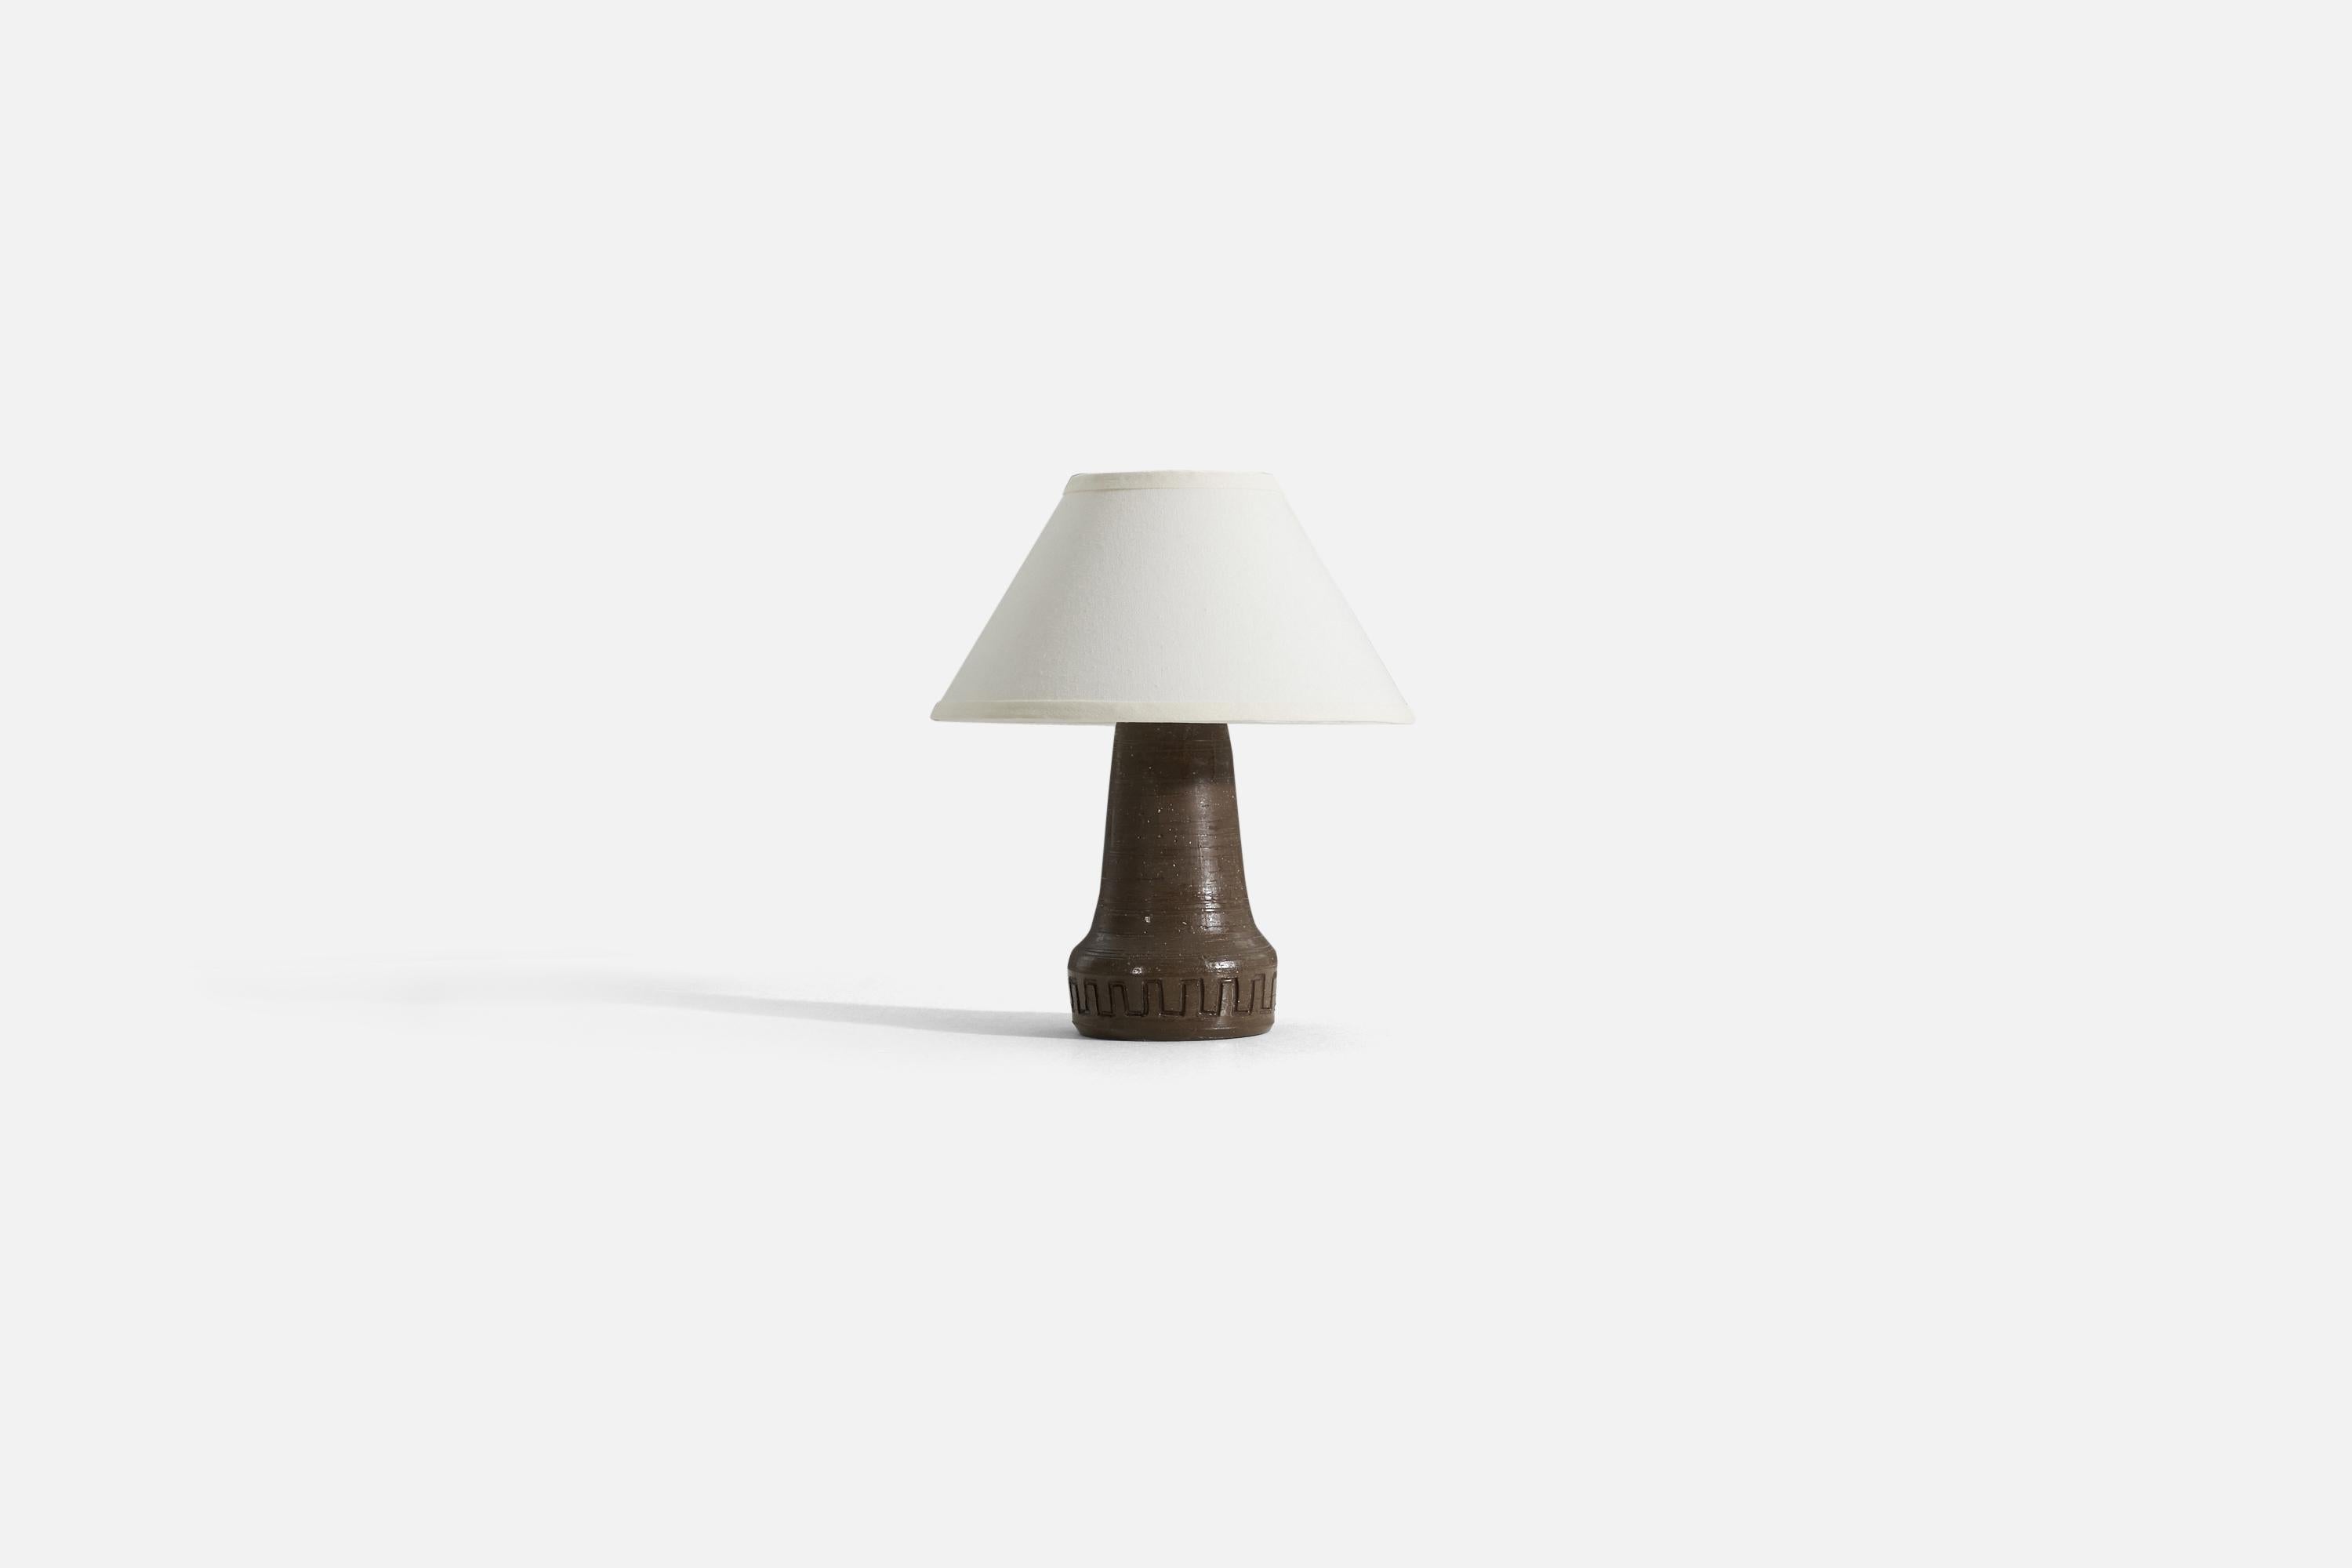 A stoneware table lamp designed and produced in Sweden, 1960s.

Sold without lampshade. 
Dimensions of Lamp (inches) : 11.5 x 5.5 x 5.5 (H x W x D)
Dimensions of Shade (inches) : 5.25 x 12.25 x 7.25 (T x B x H)
Dimension of Lamp with shade